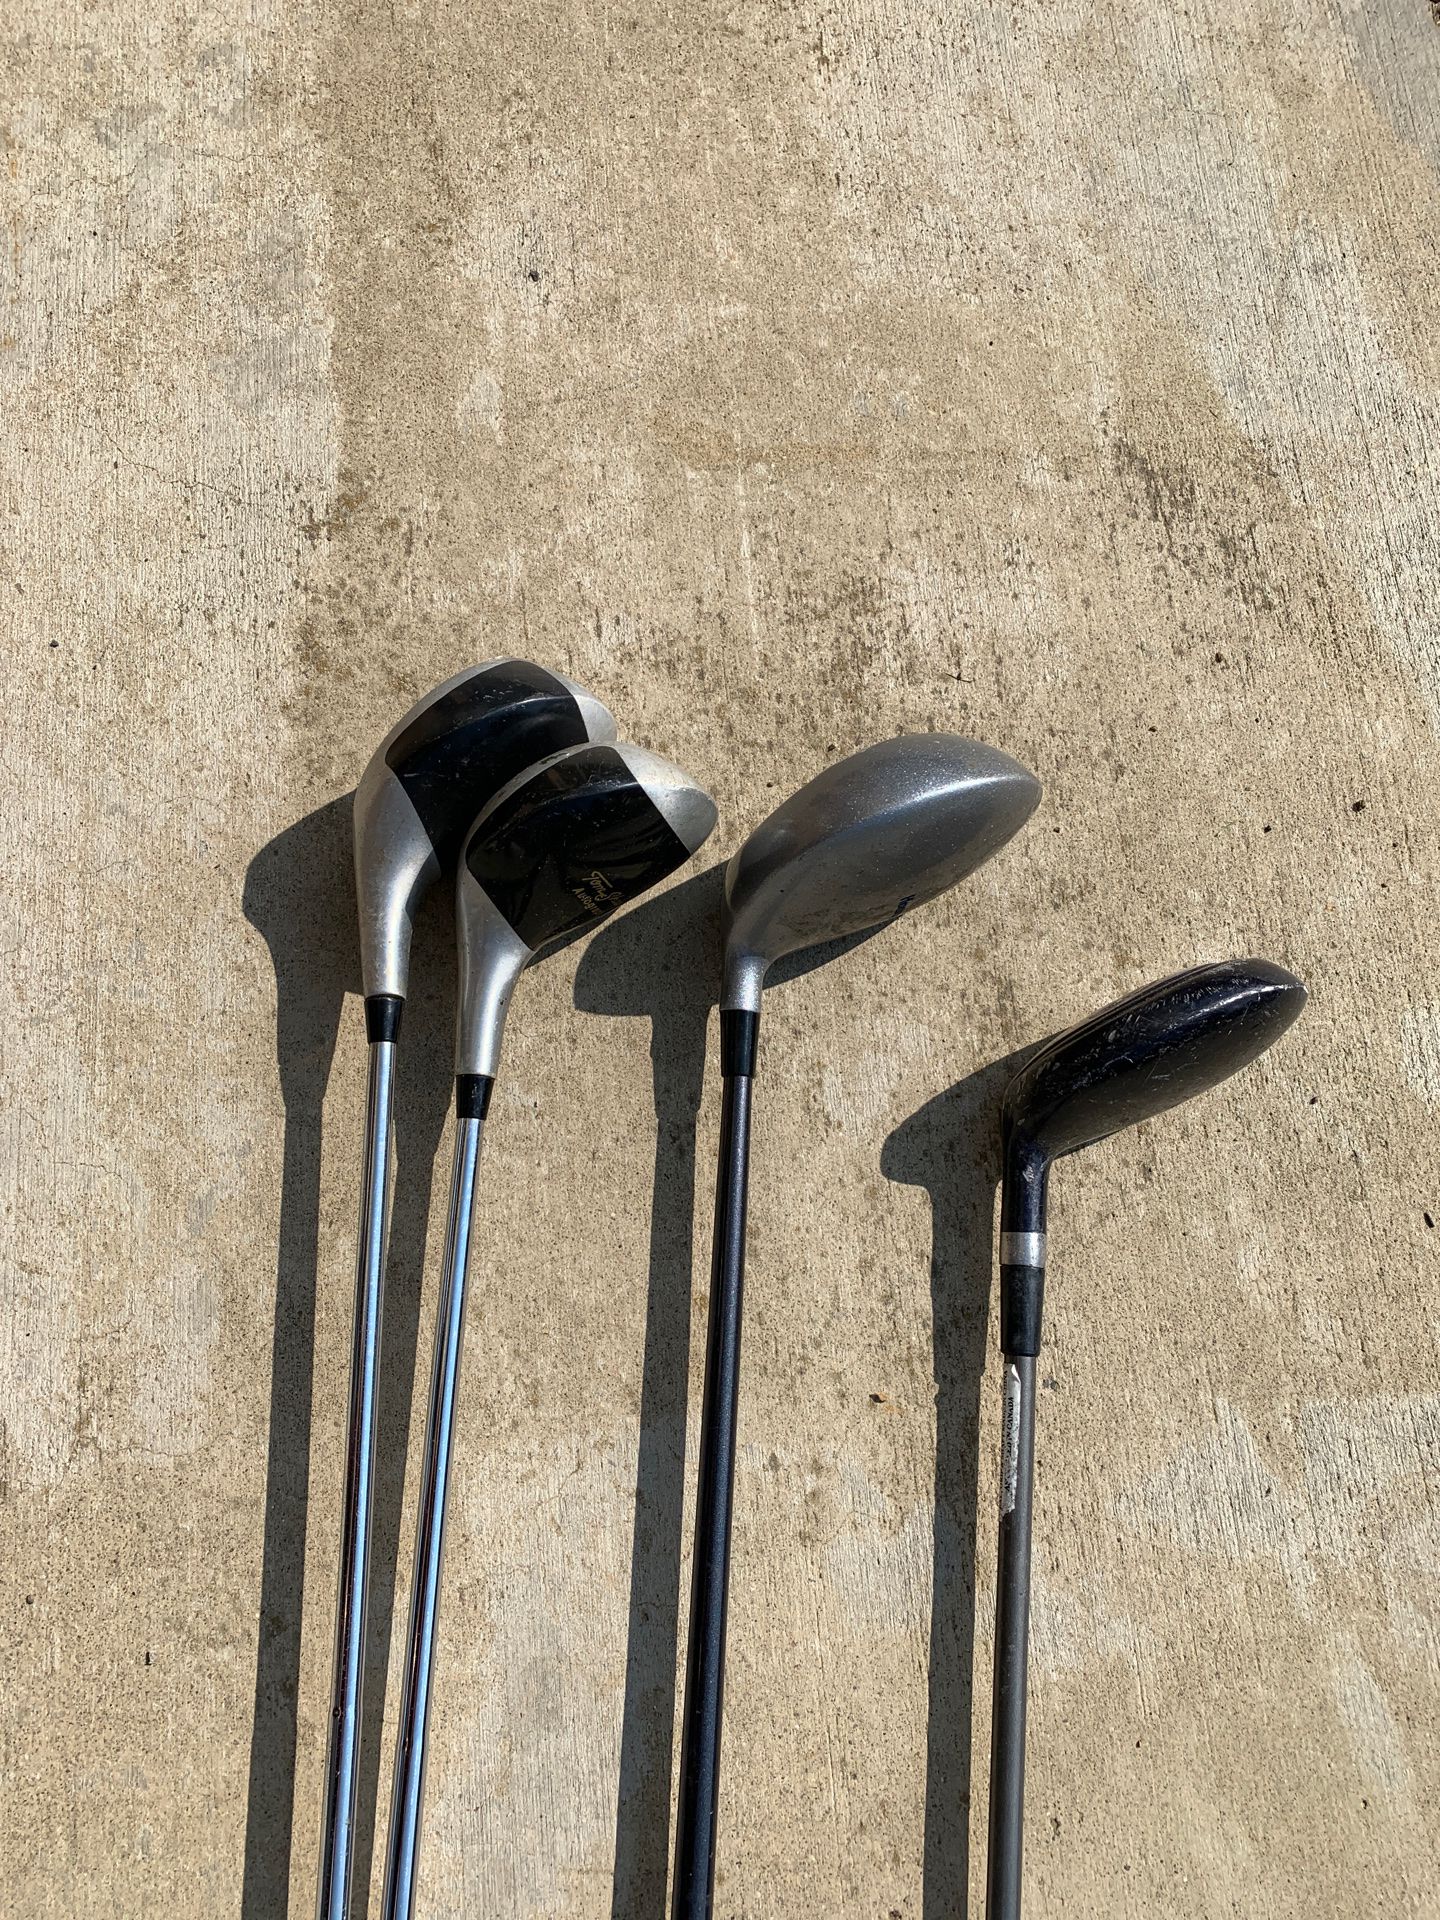 4 left handed golf clubs good condition